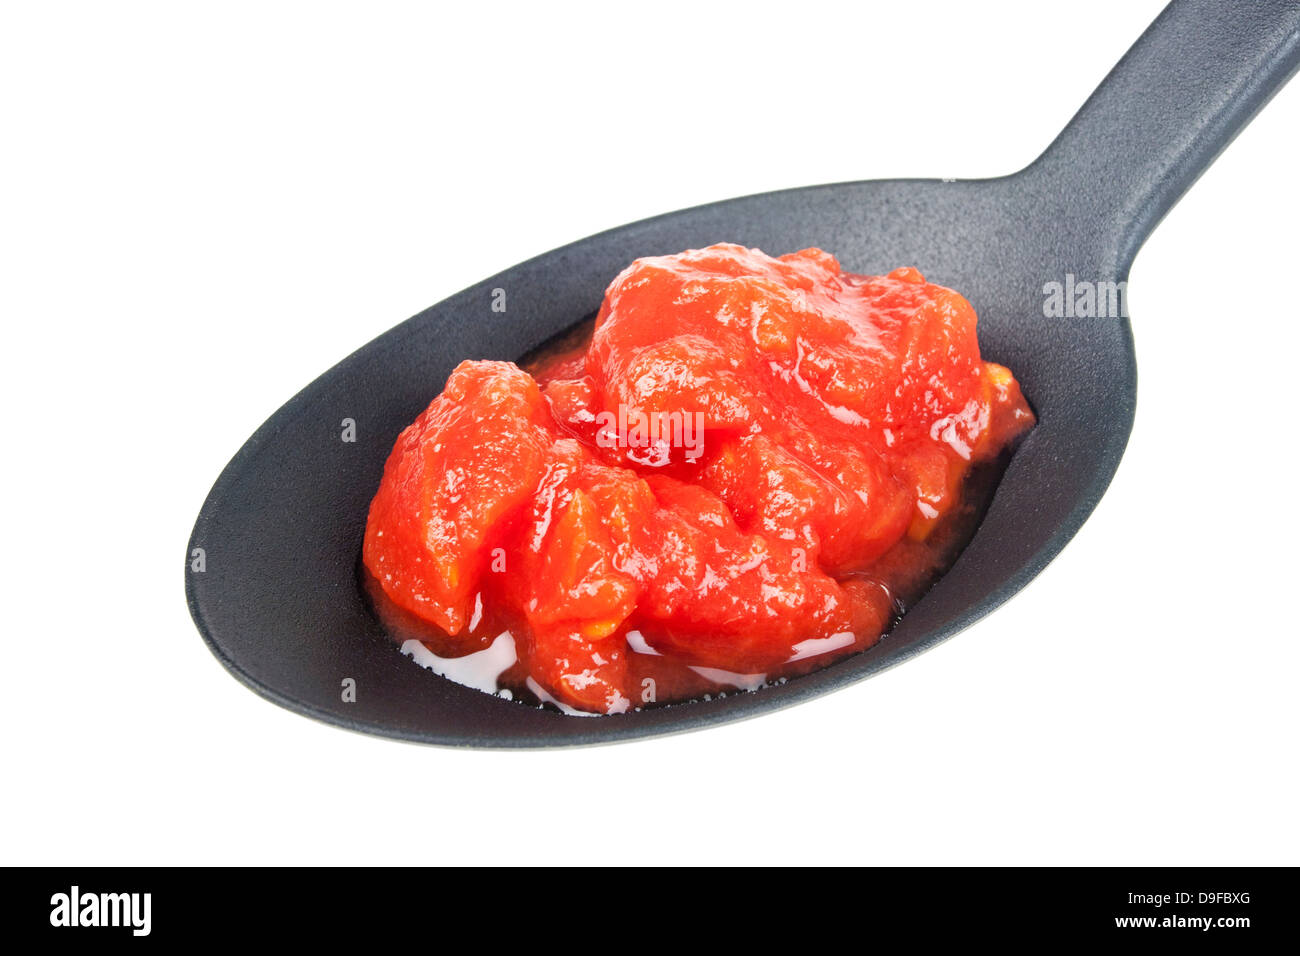 Passed tomatoes on a spoon Crushed tomatoes on a spoon Stock Photo